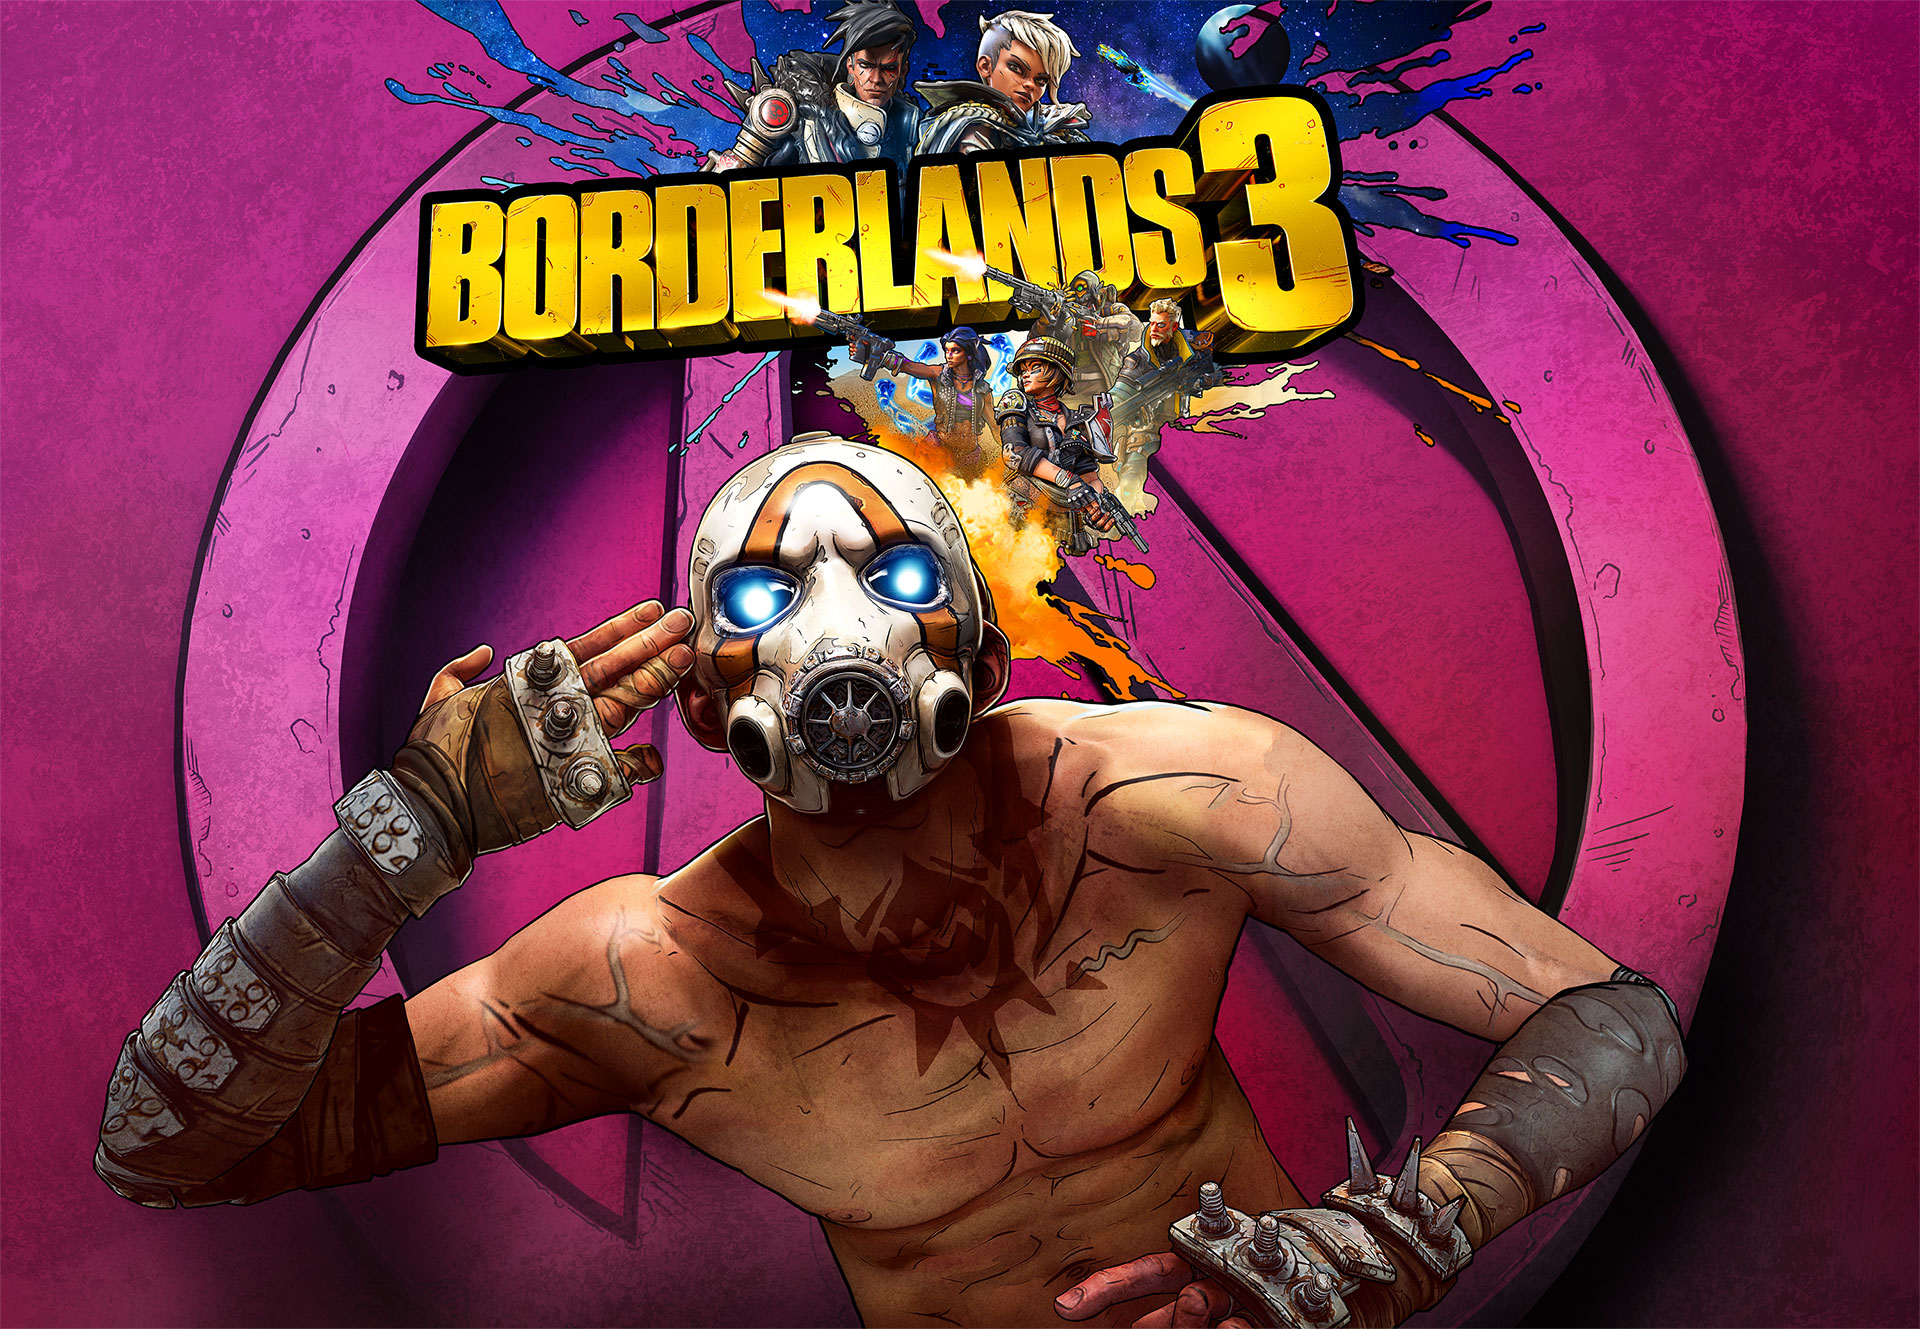 Borderlands 3's second campaign add-on and Steam release coming this March